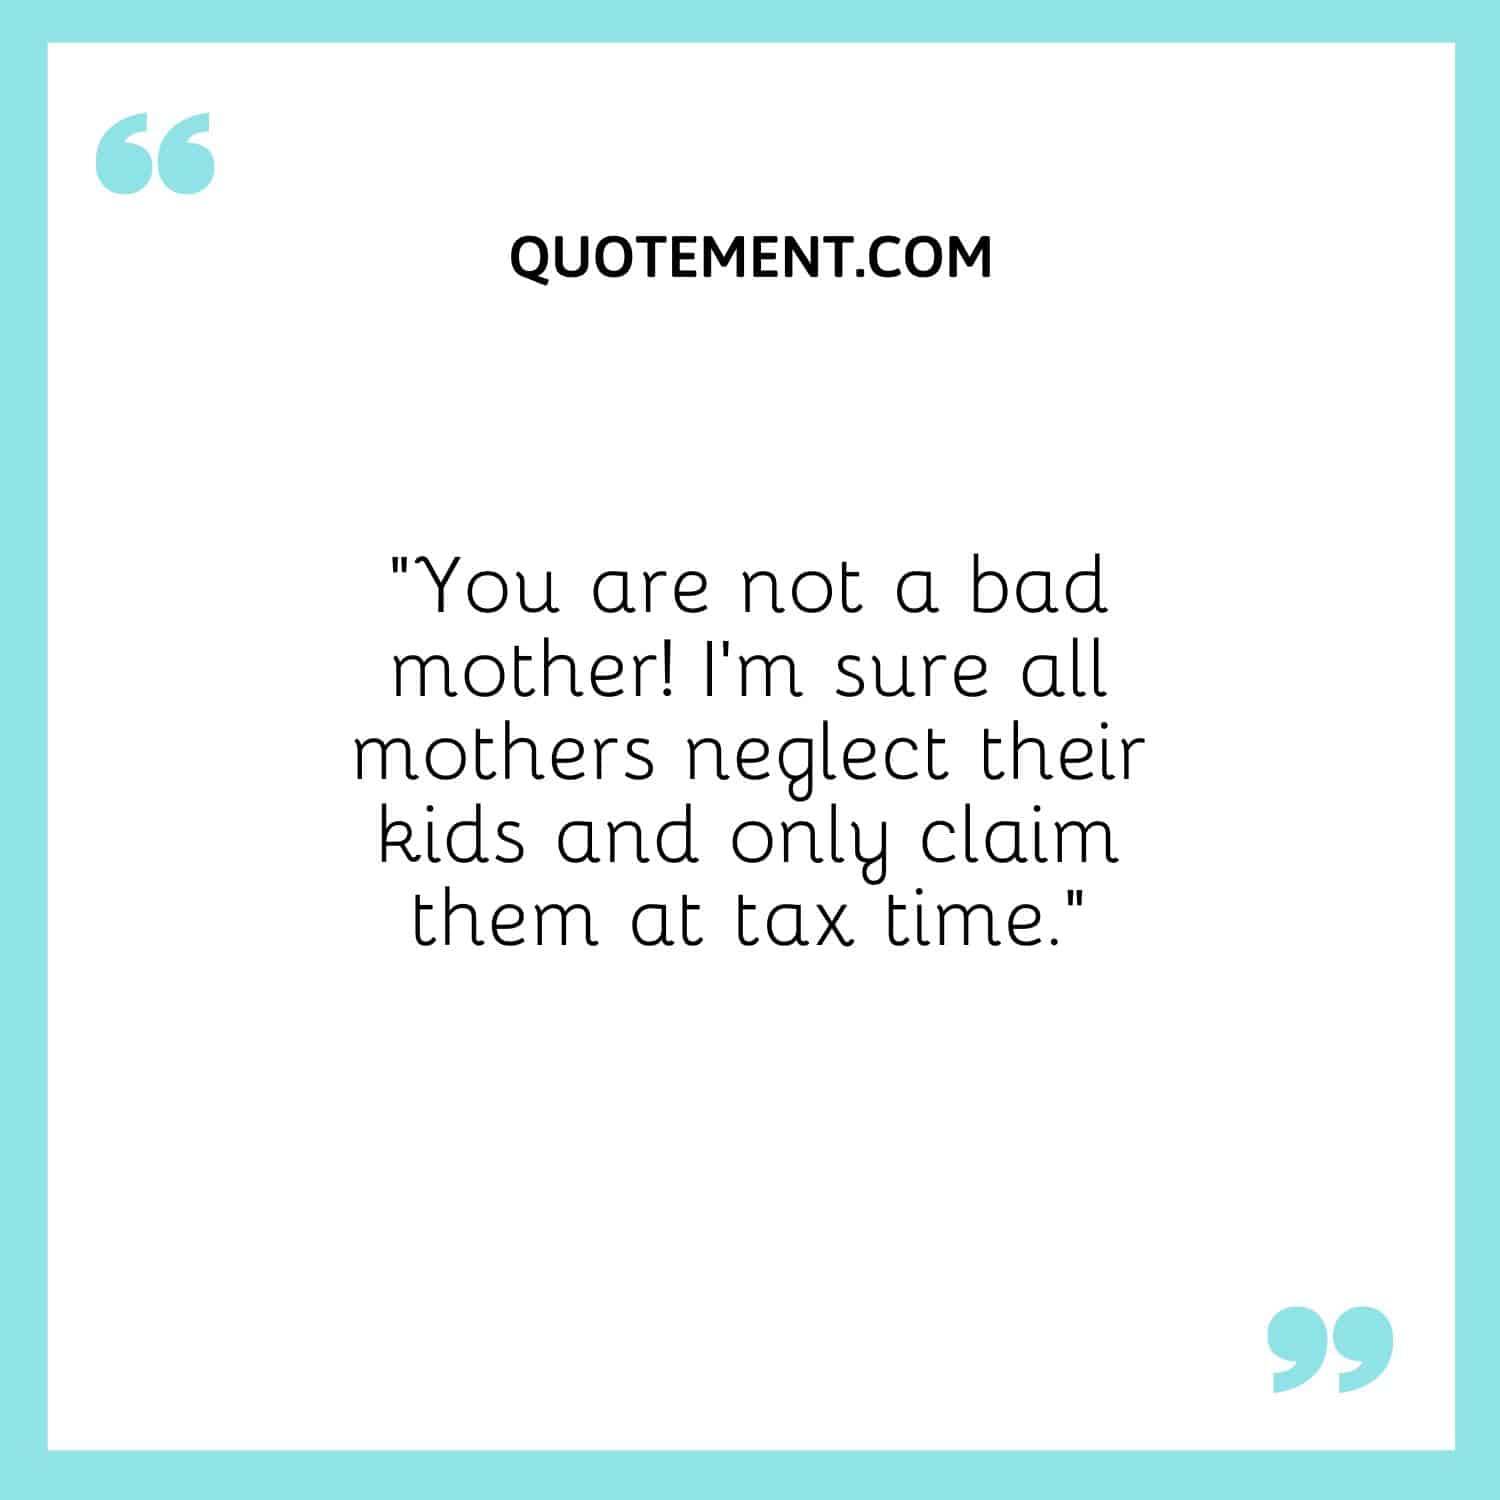 I’m sure all mothers neglect their kids and only claim them at tax time